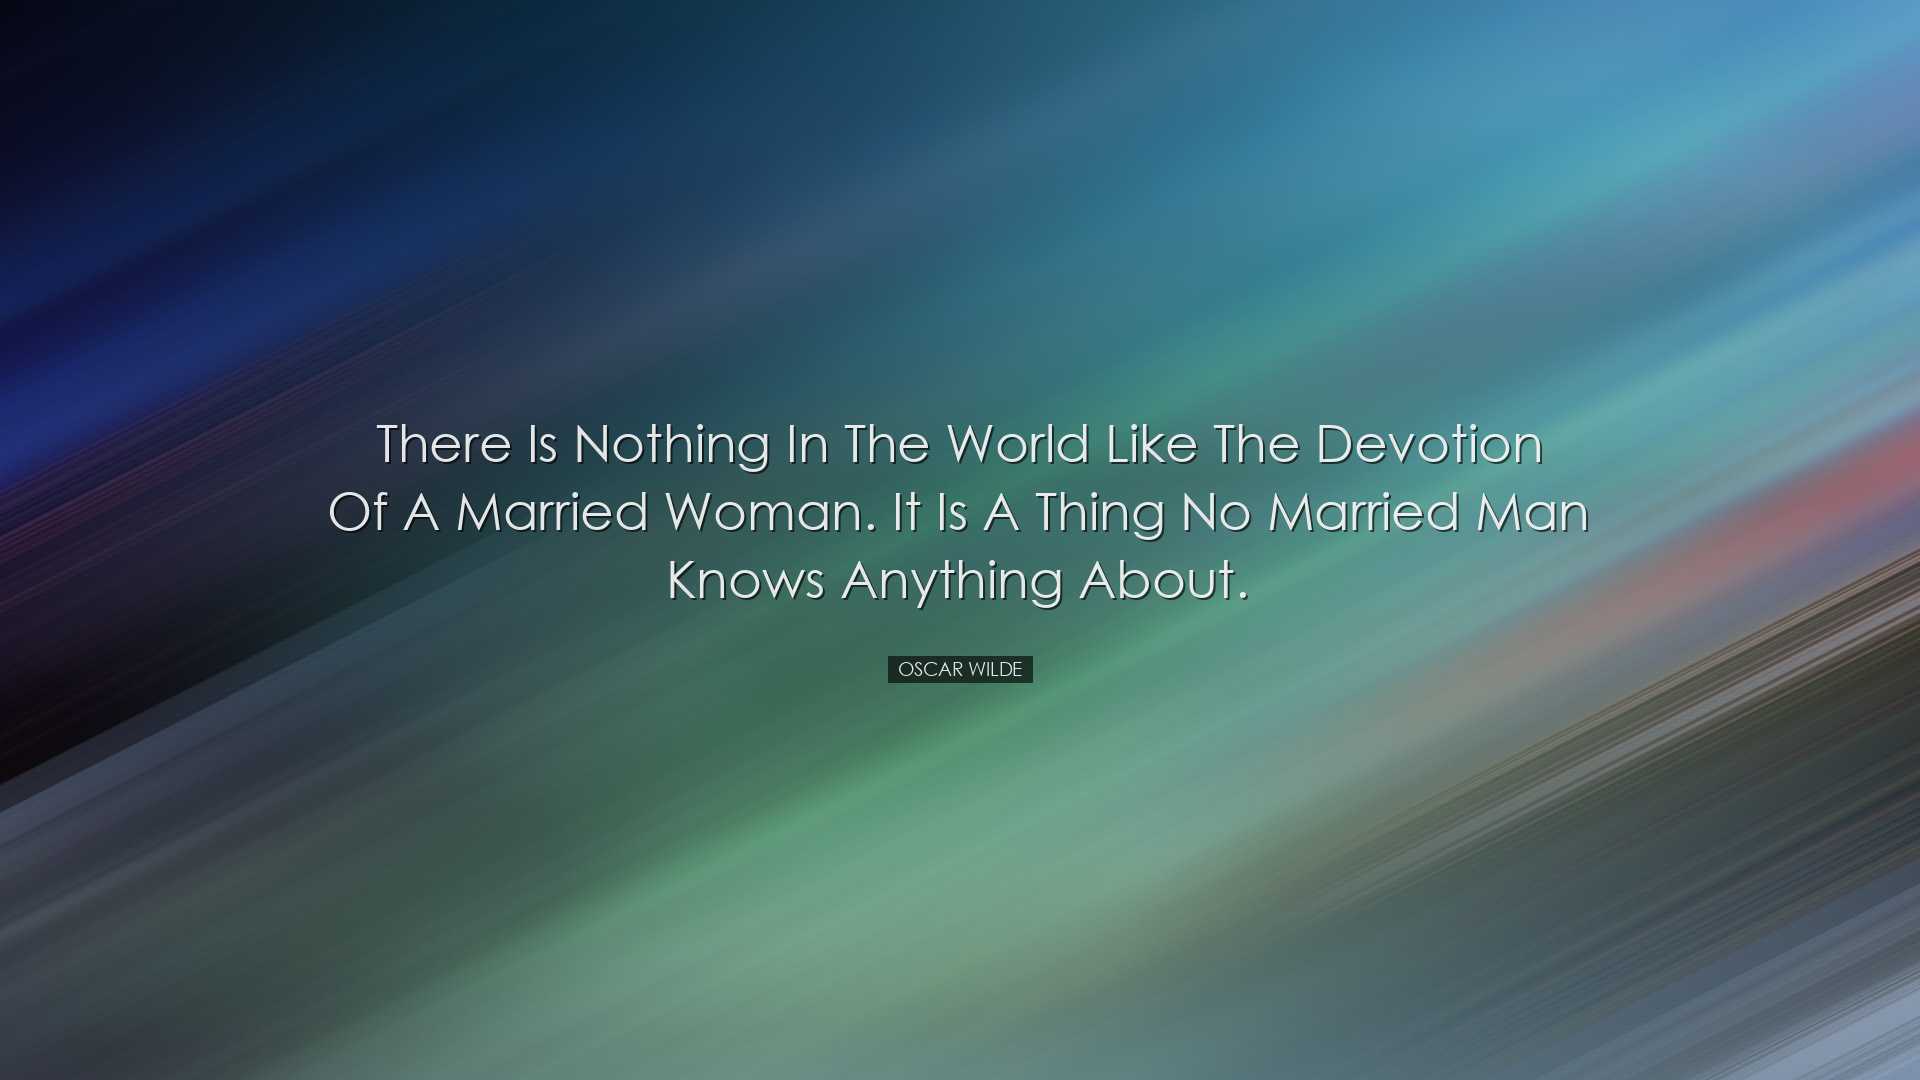 There is nothing in the world like the devotion of a married woman